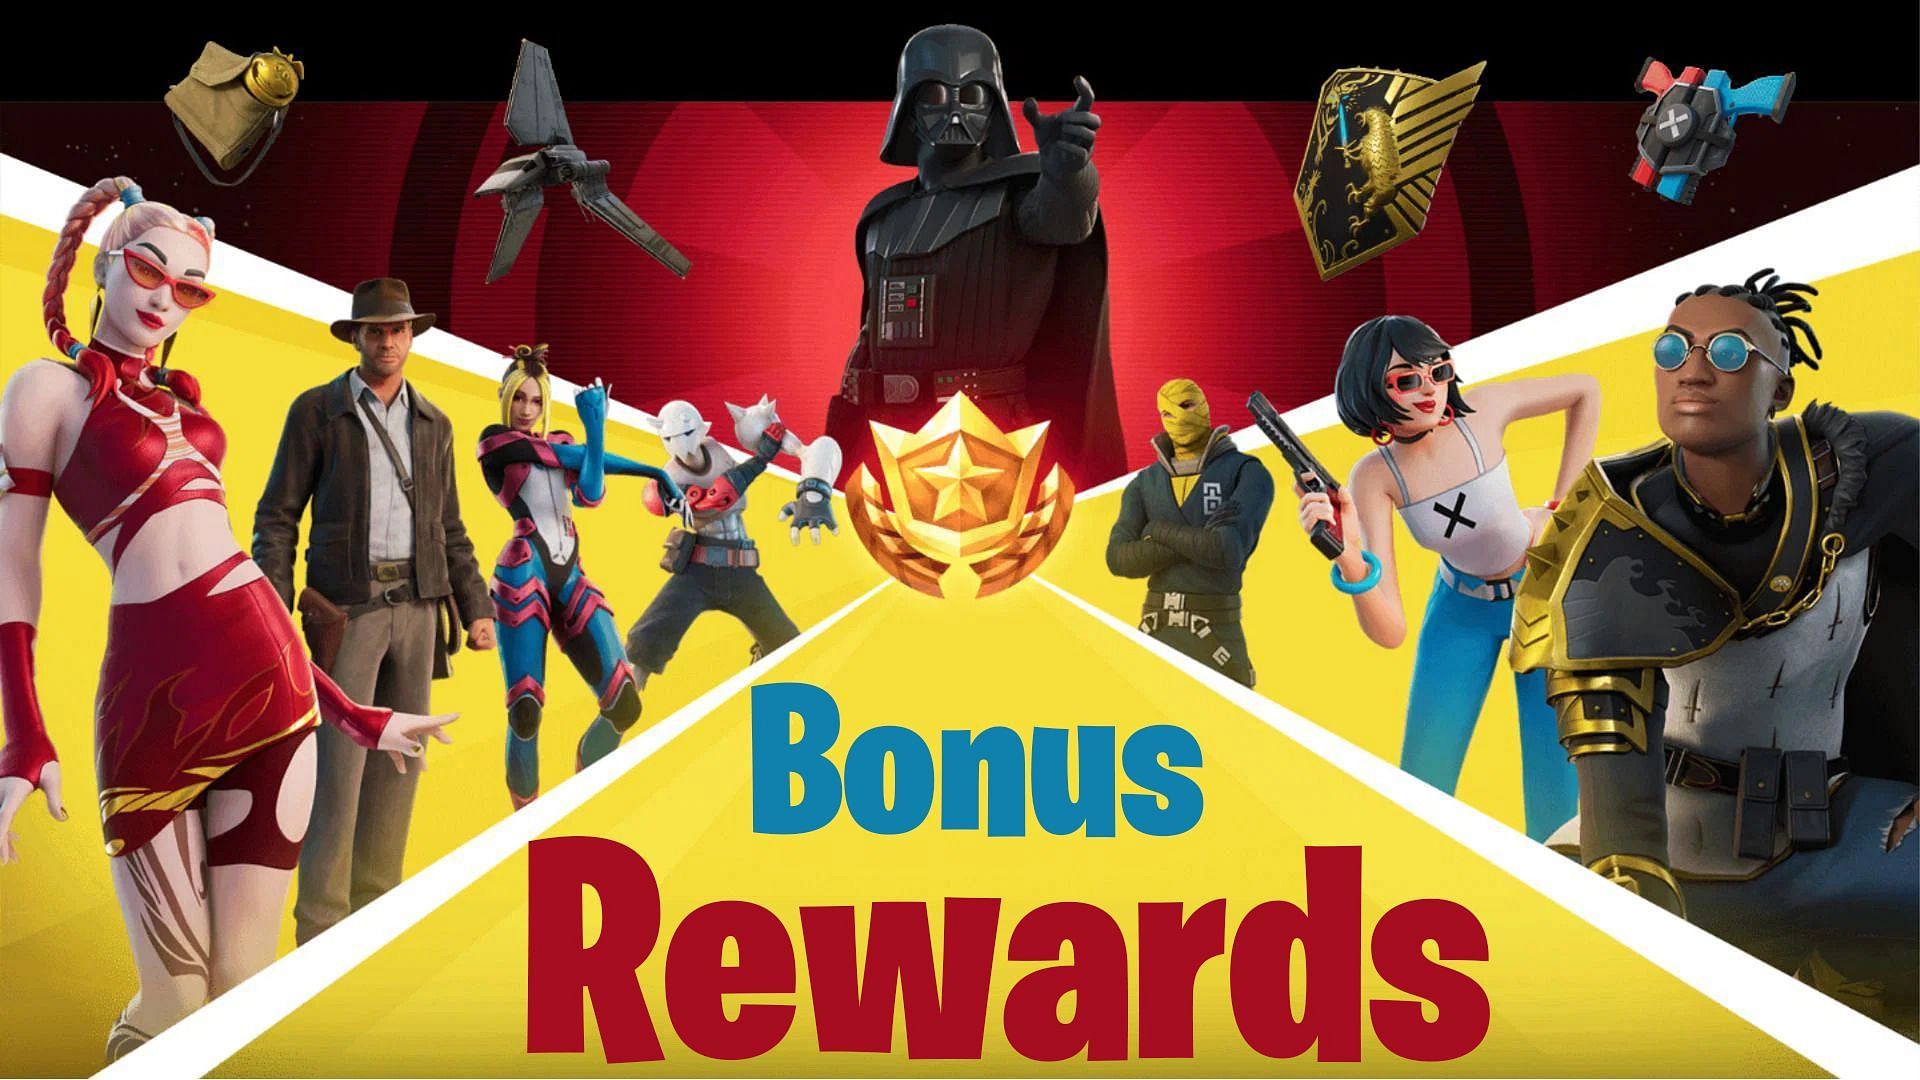 Bonus rewards are generally a different iteration of the items already available in the battle pass in Fortnite Chapter 3 Season 3 (Image via Epic/Sportskeeda)